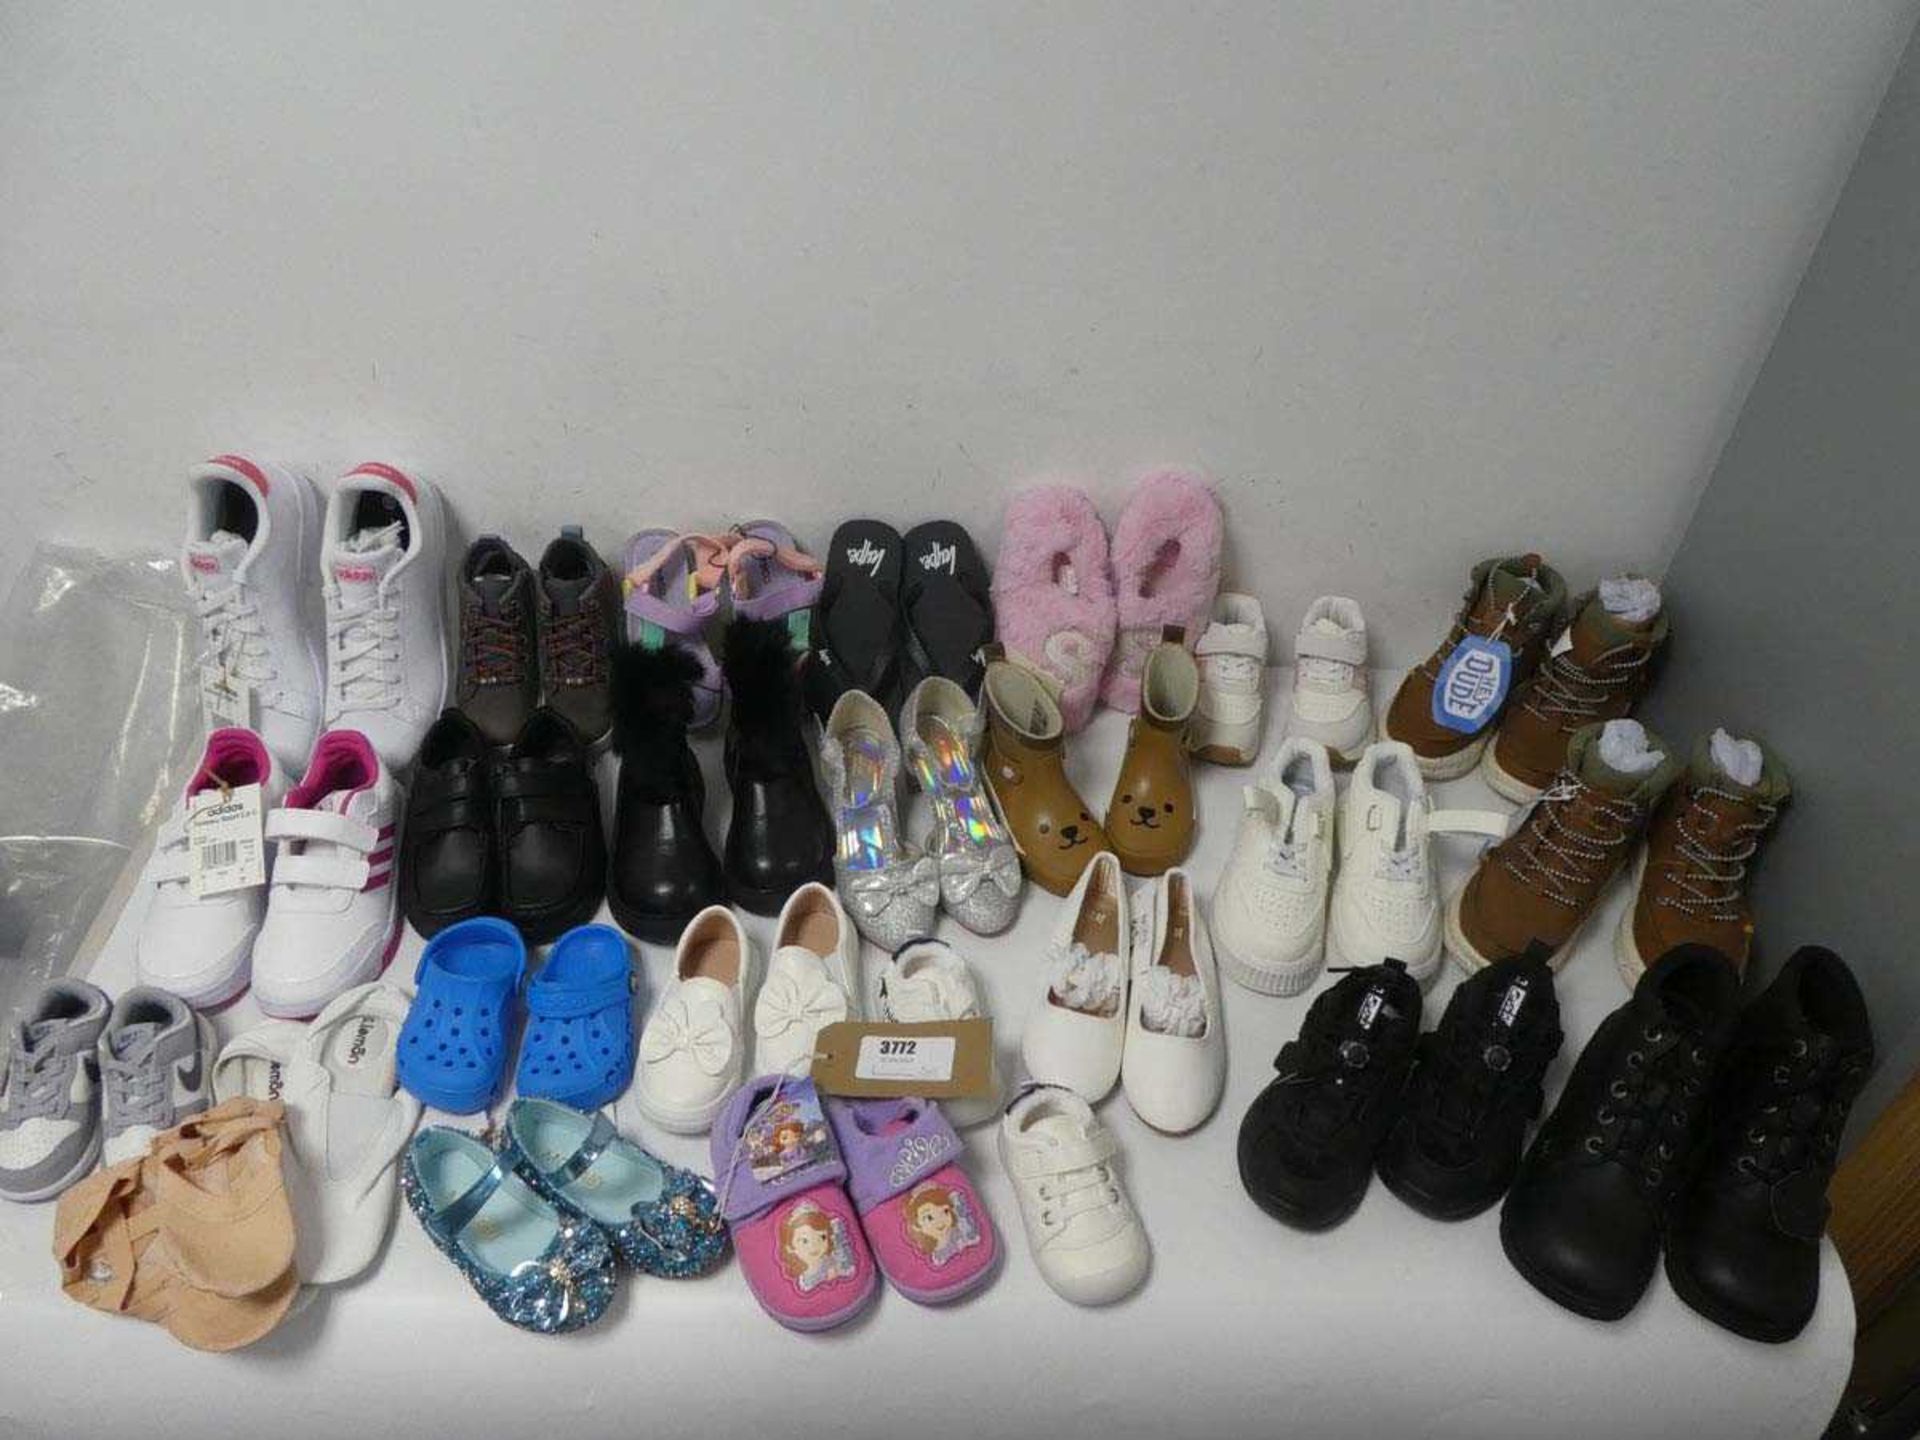 25 x pairs of kids/junior shoes of various styles and sizes, includes- Adidas, Nike, Crocs